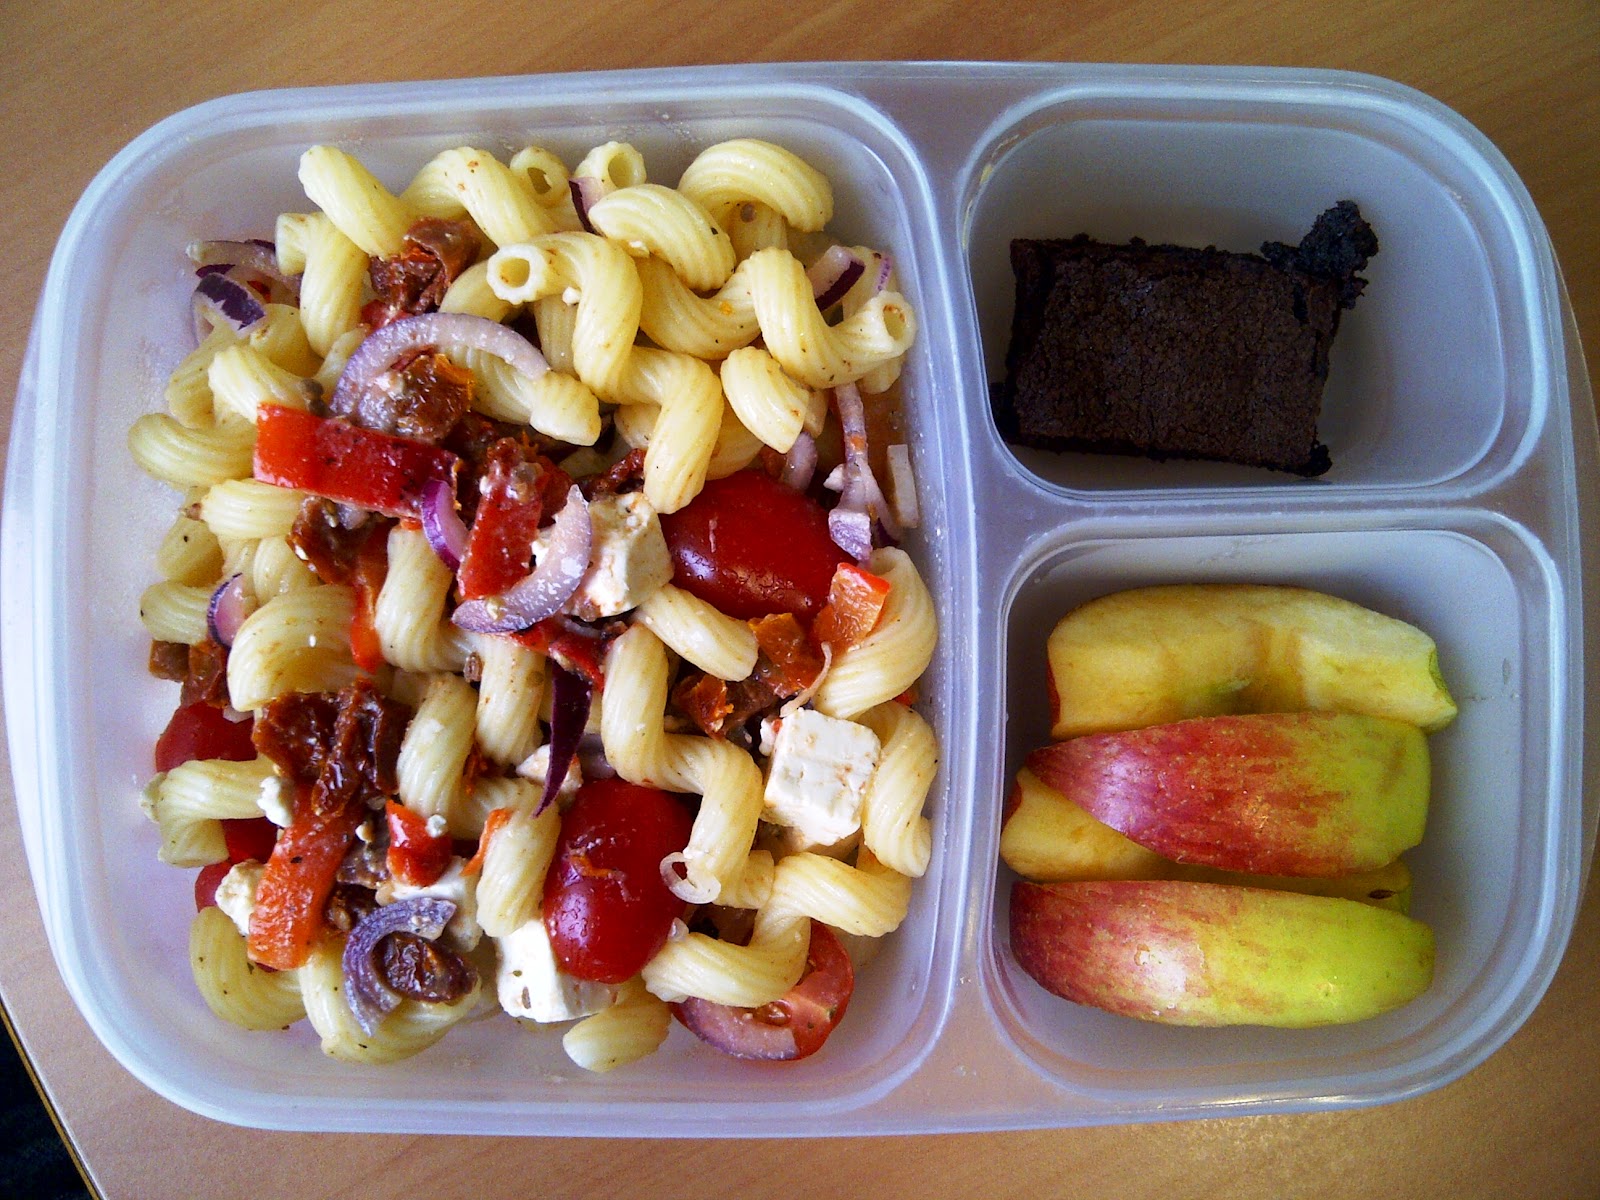 Diary of an ex-dancer...: Lunch Box - Summer Pasta Salad